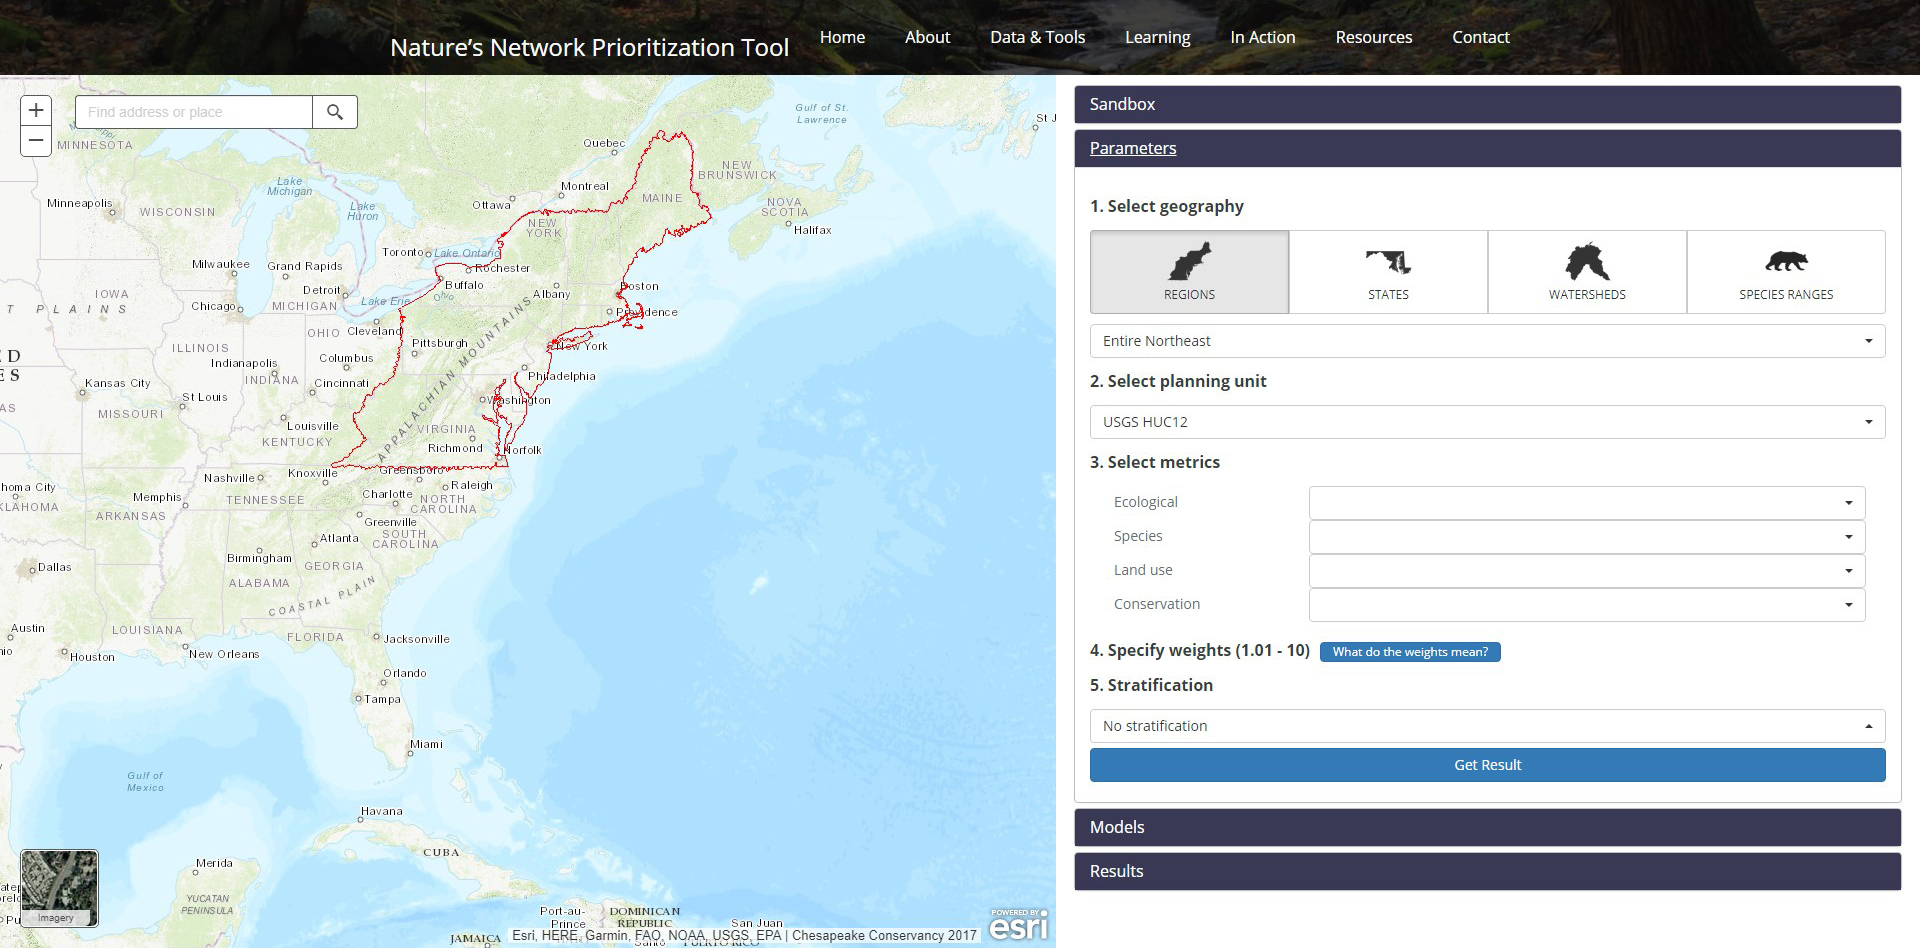 A screenshot of the tool, Nature's Network Prioritization Tool, being used.